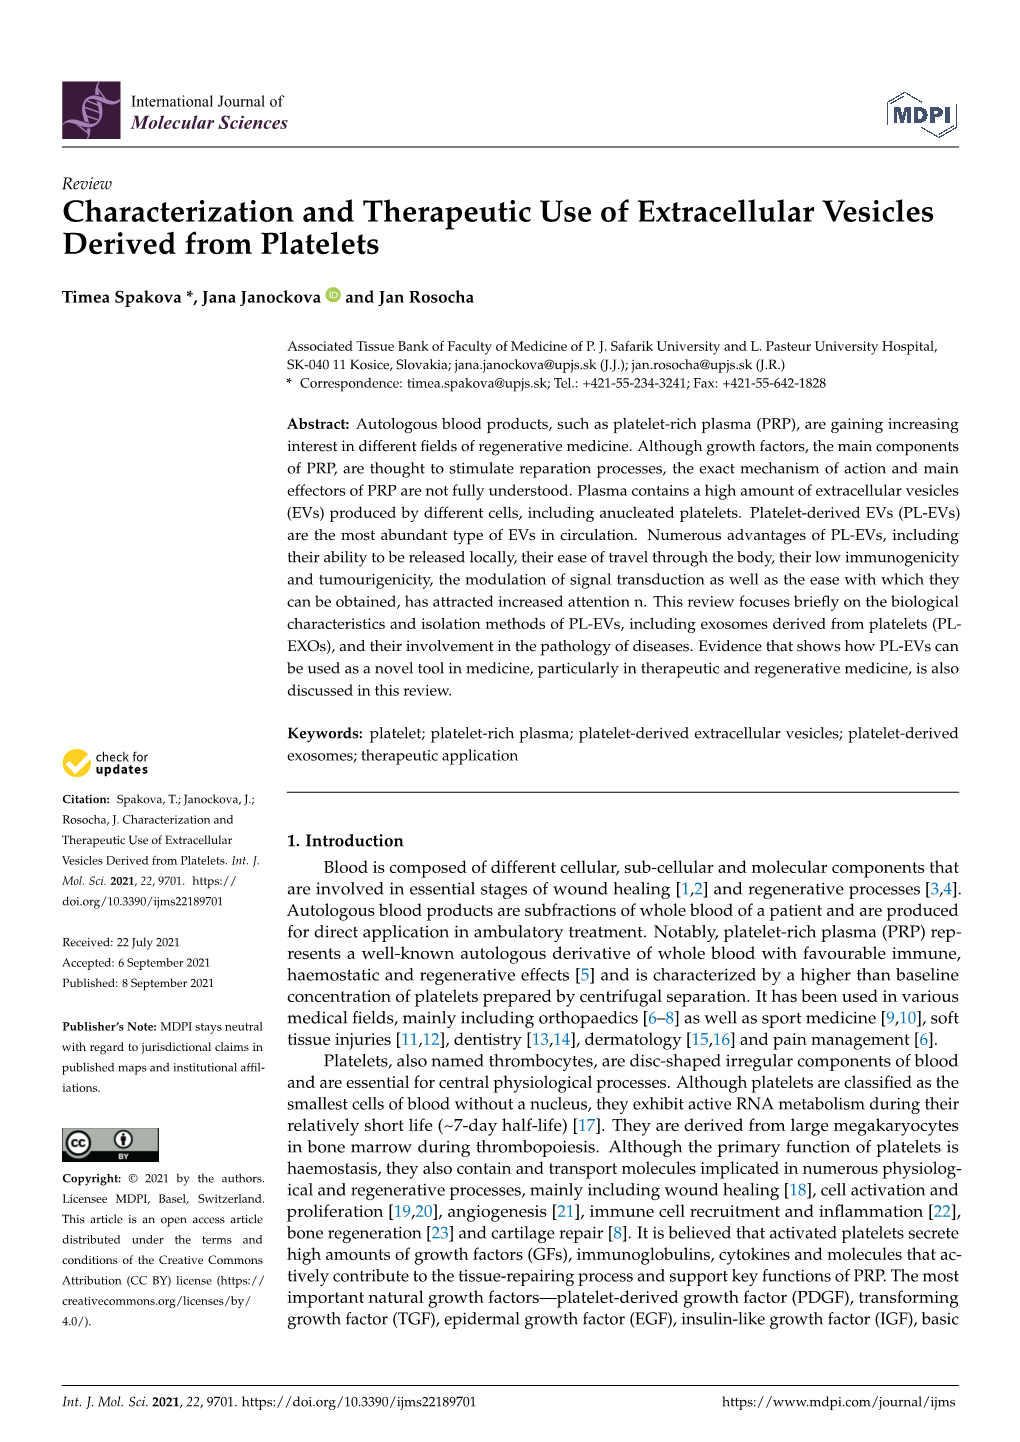 Characterization and Therapeutic Use of Extracellular Vesicles Derived from Platelets